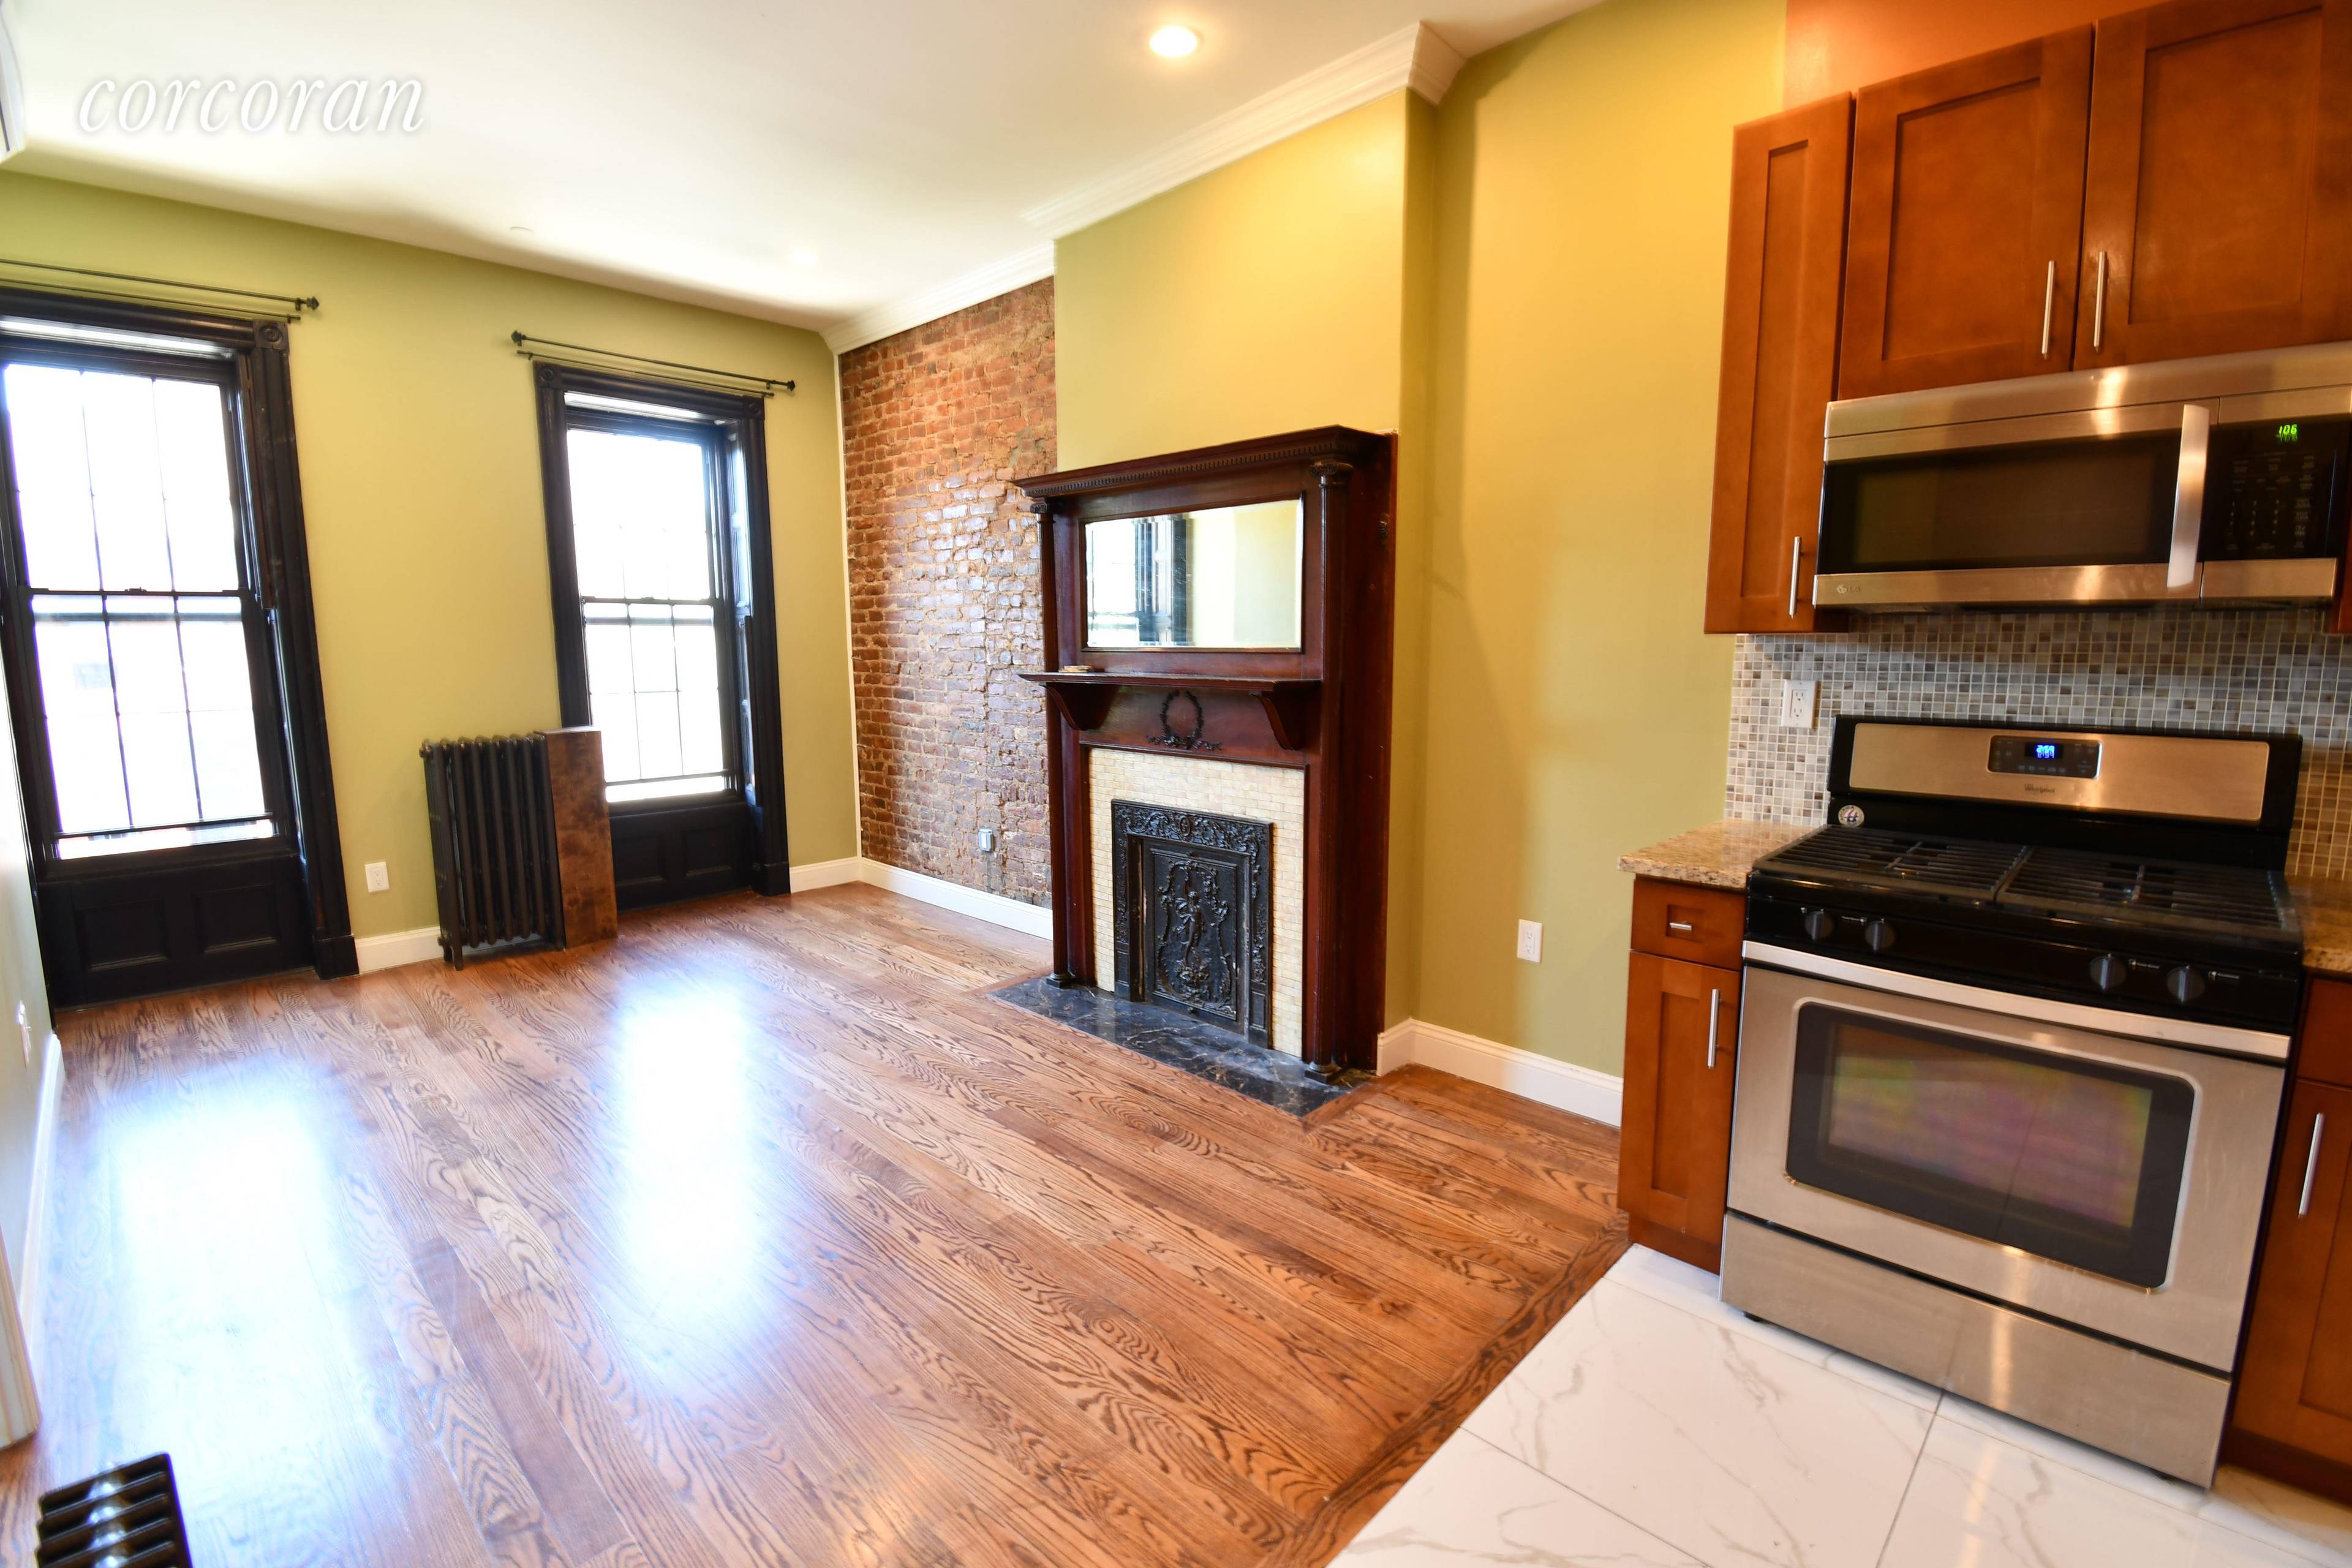 No Fee Welcome to this newly renovated three bedroom in a beautifully restored brownstone.